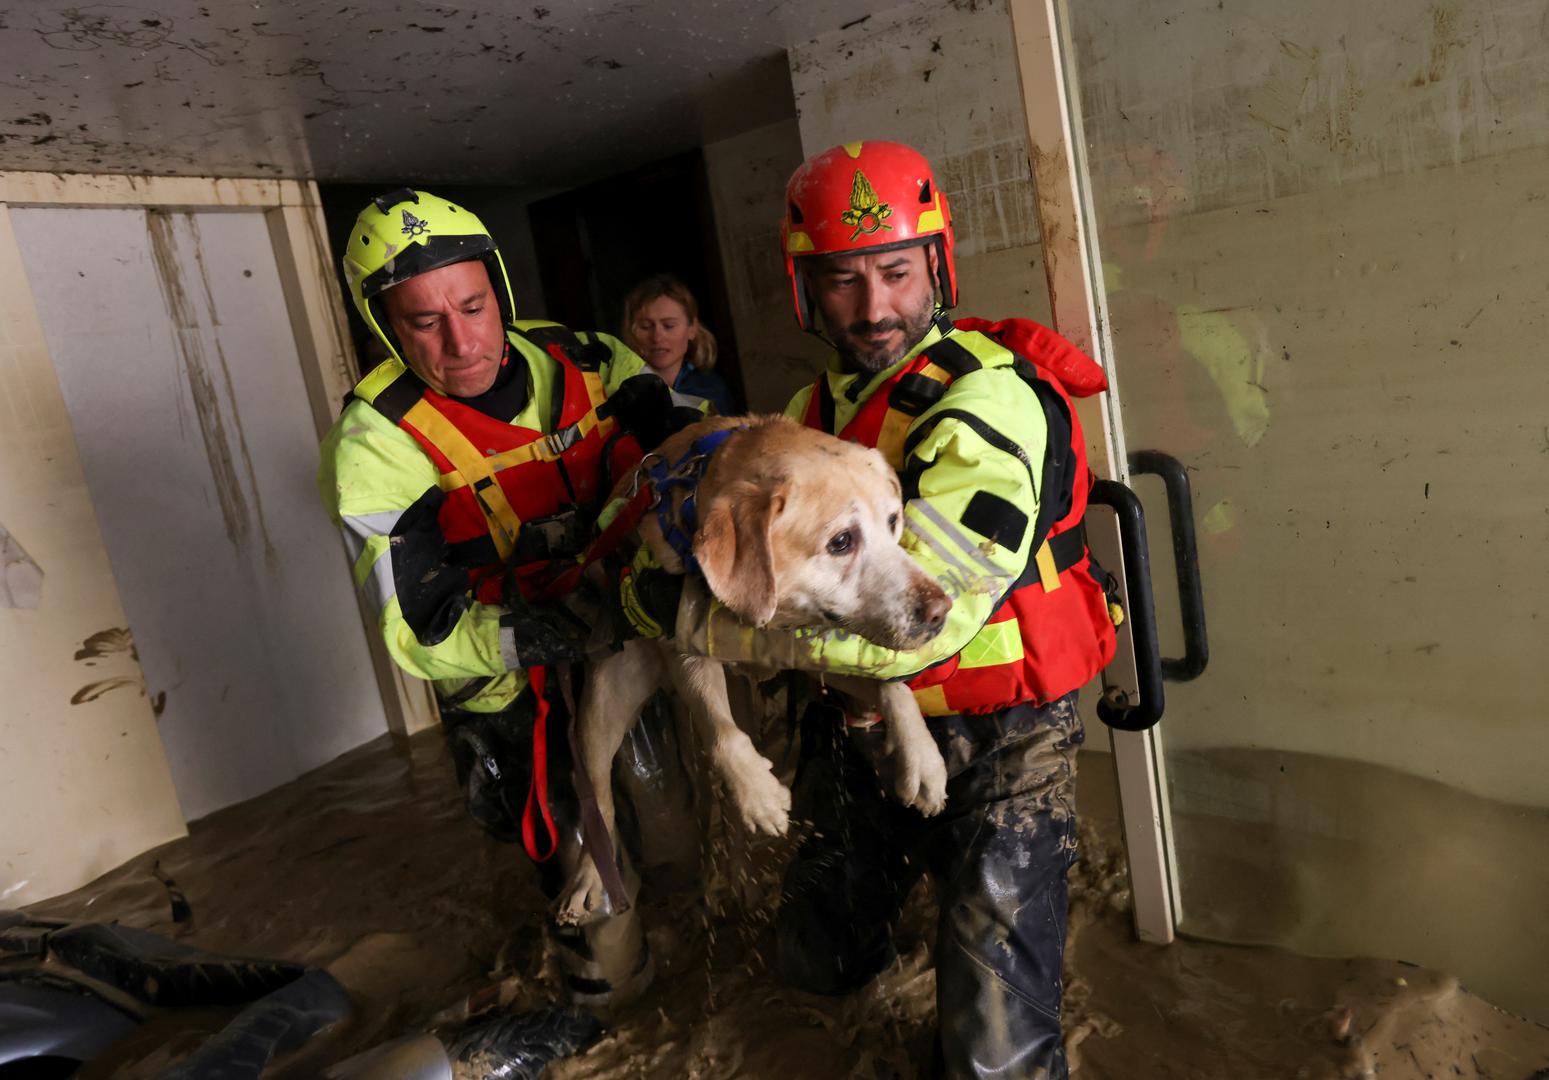 Firefighters evacuate a dog from a flooded house, after heavy rains hit Italy's Emilia Romagna region, in Faenza, Italy, May 18, 2023. REUTERS/Claudia Greco Photo: CLAUDIA GRECO/REUTERS